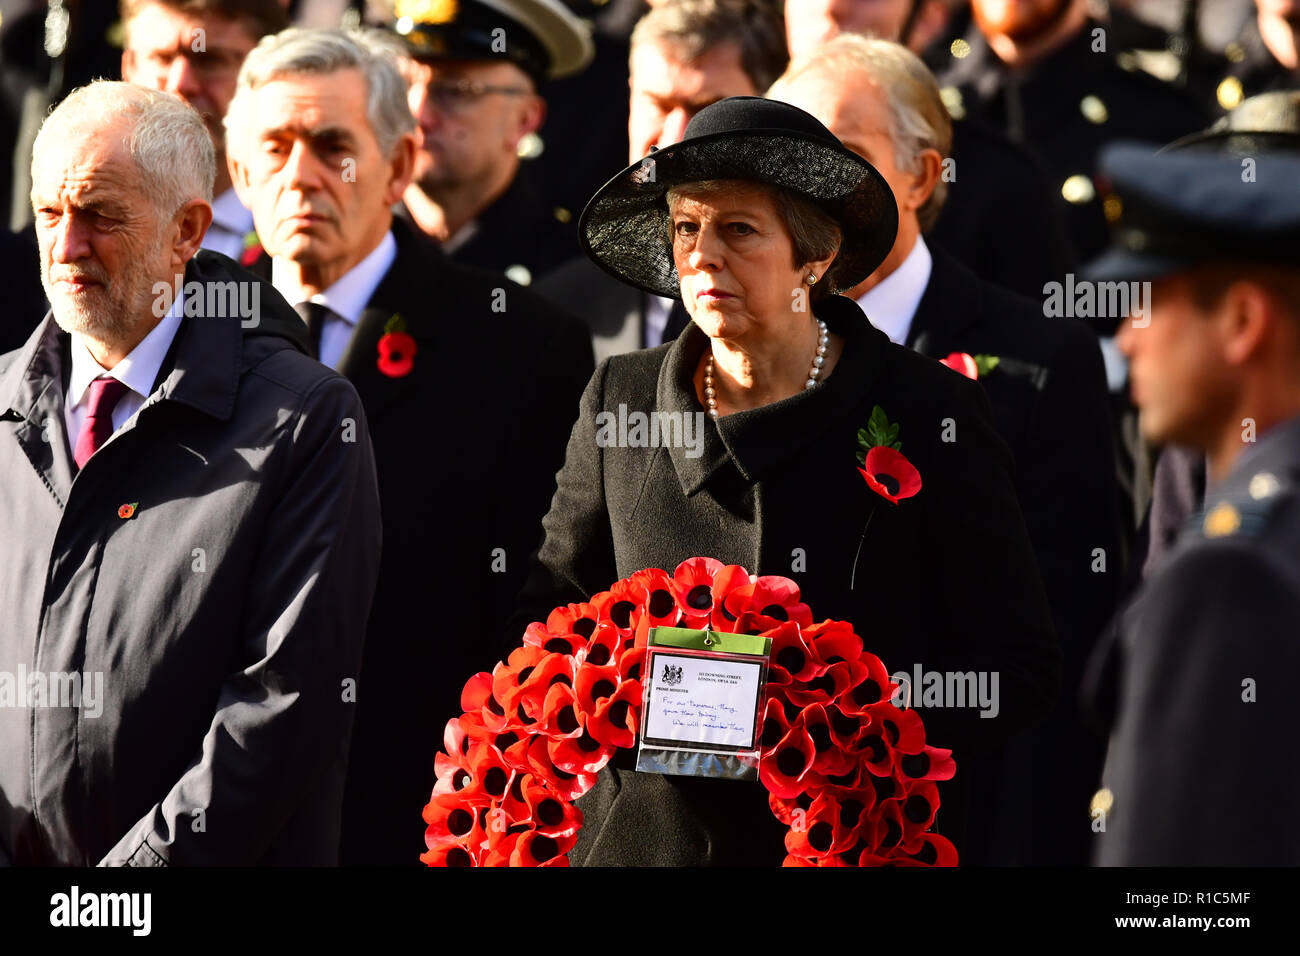 Jeremy Corbyn and Prime MinisterTheresa May during the remembrance service at the Cenotaph memorial in Whitehall, central London, on the 100th anniversary of the signing of the Armistice which marked the end of the First World War. Stock Photo